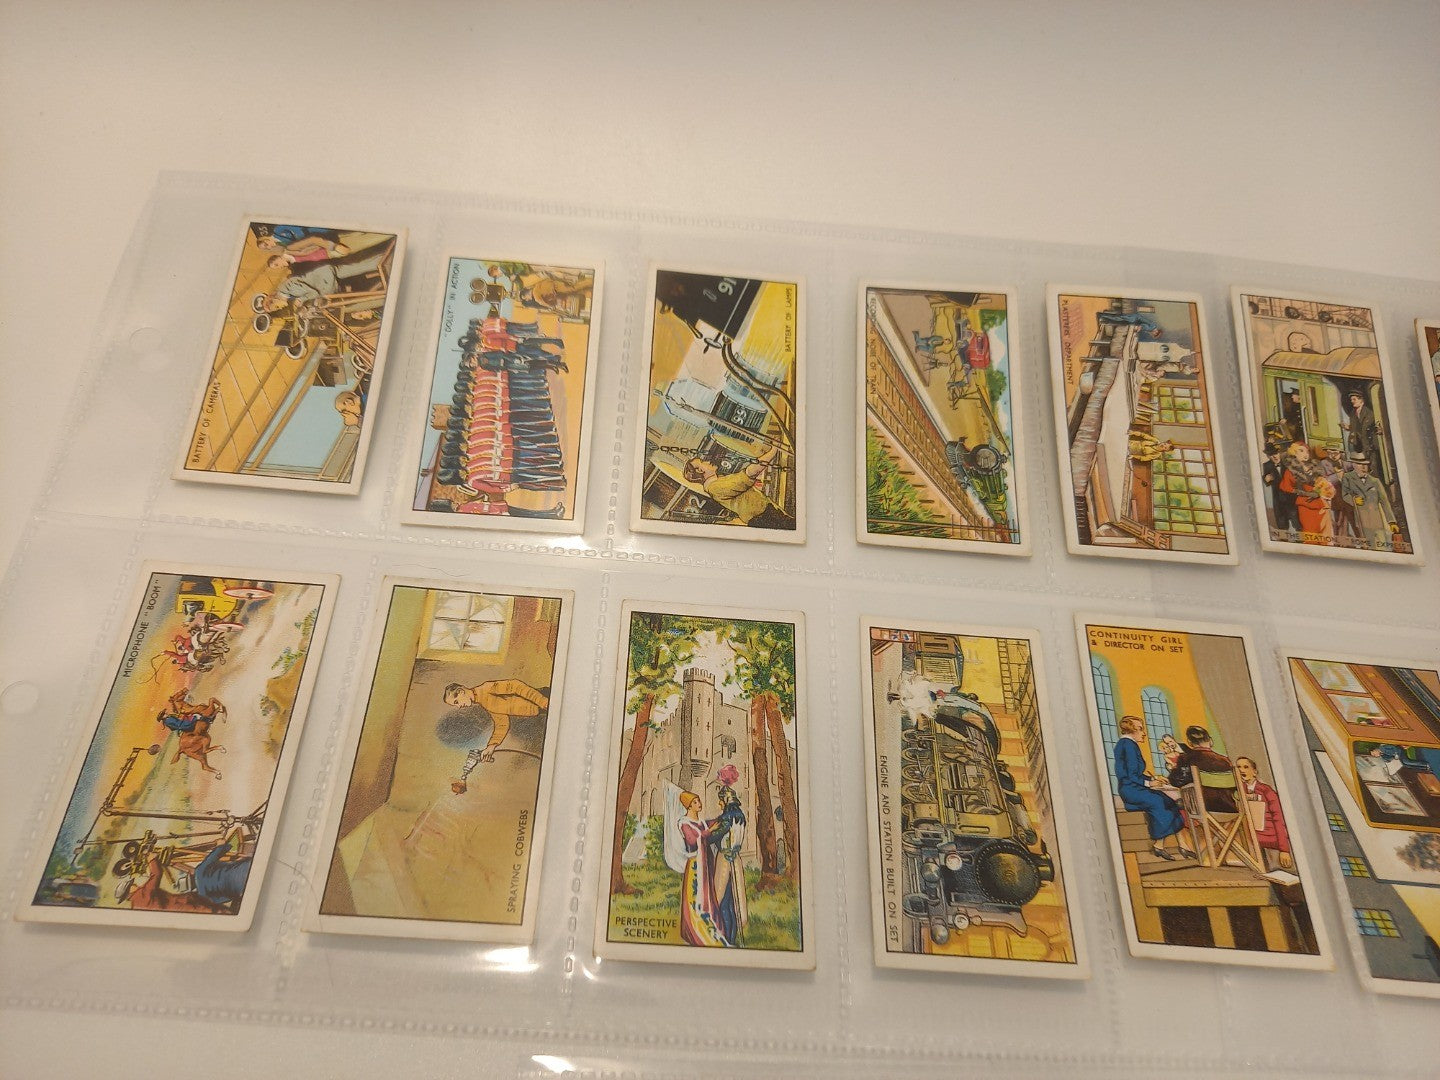 B Morris & Sons 'How Films are Made' Complete Set of 25 Cigarette Cards 1934